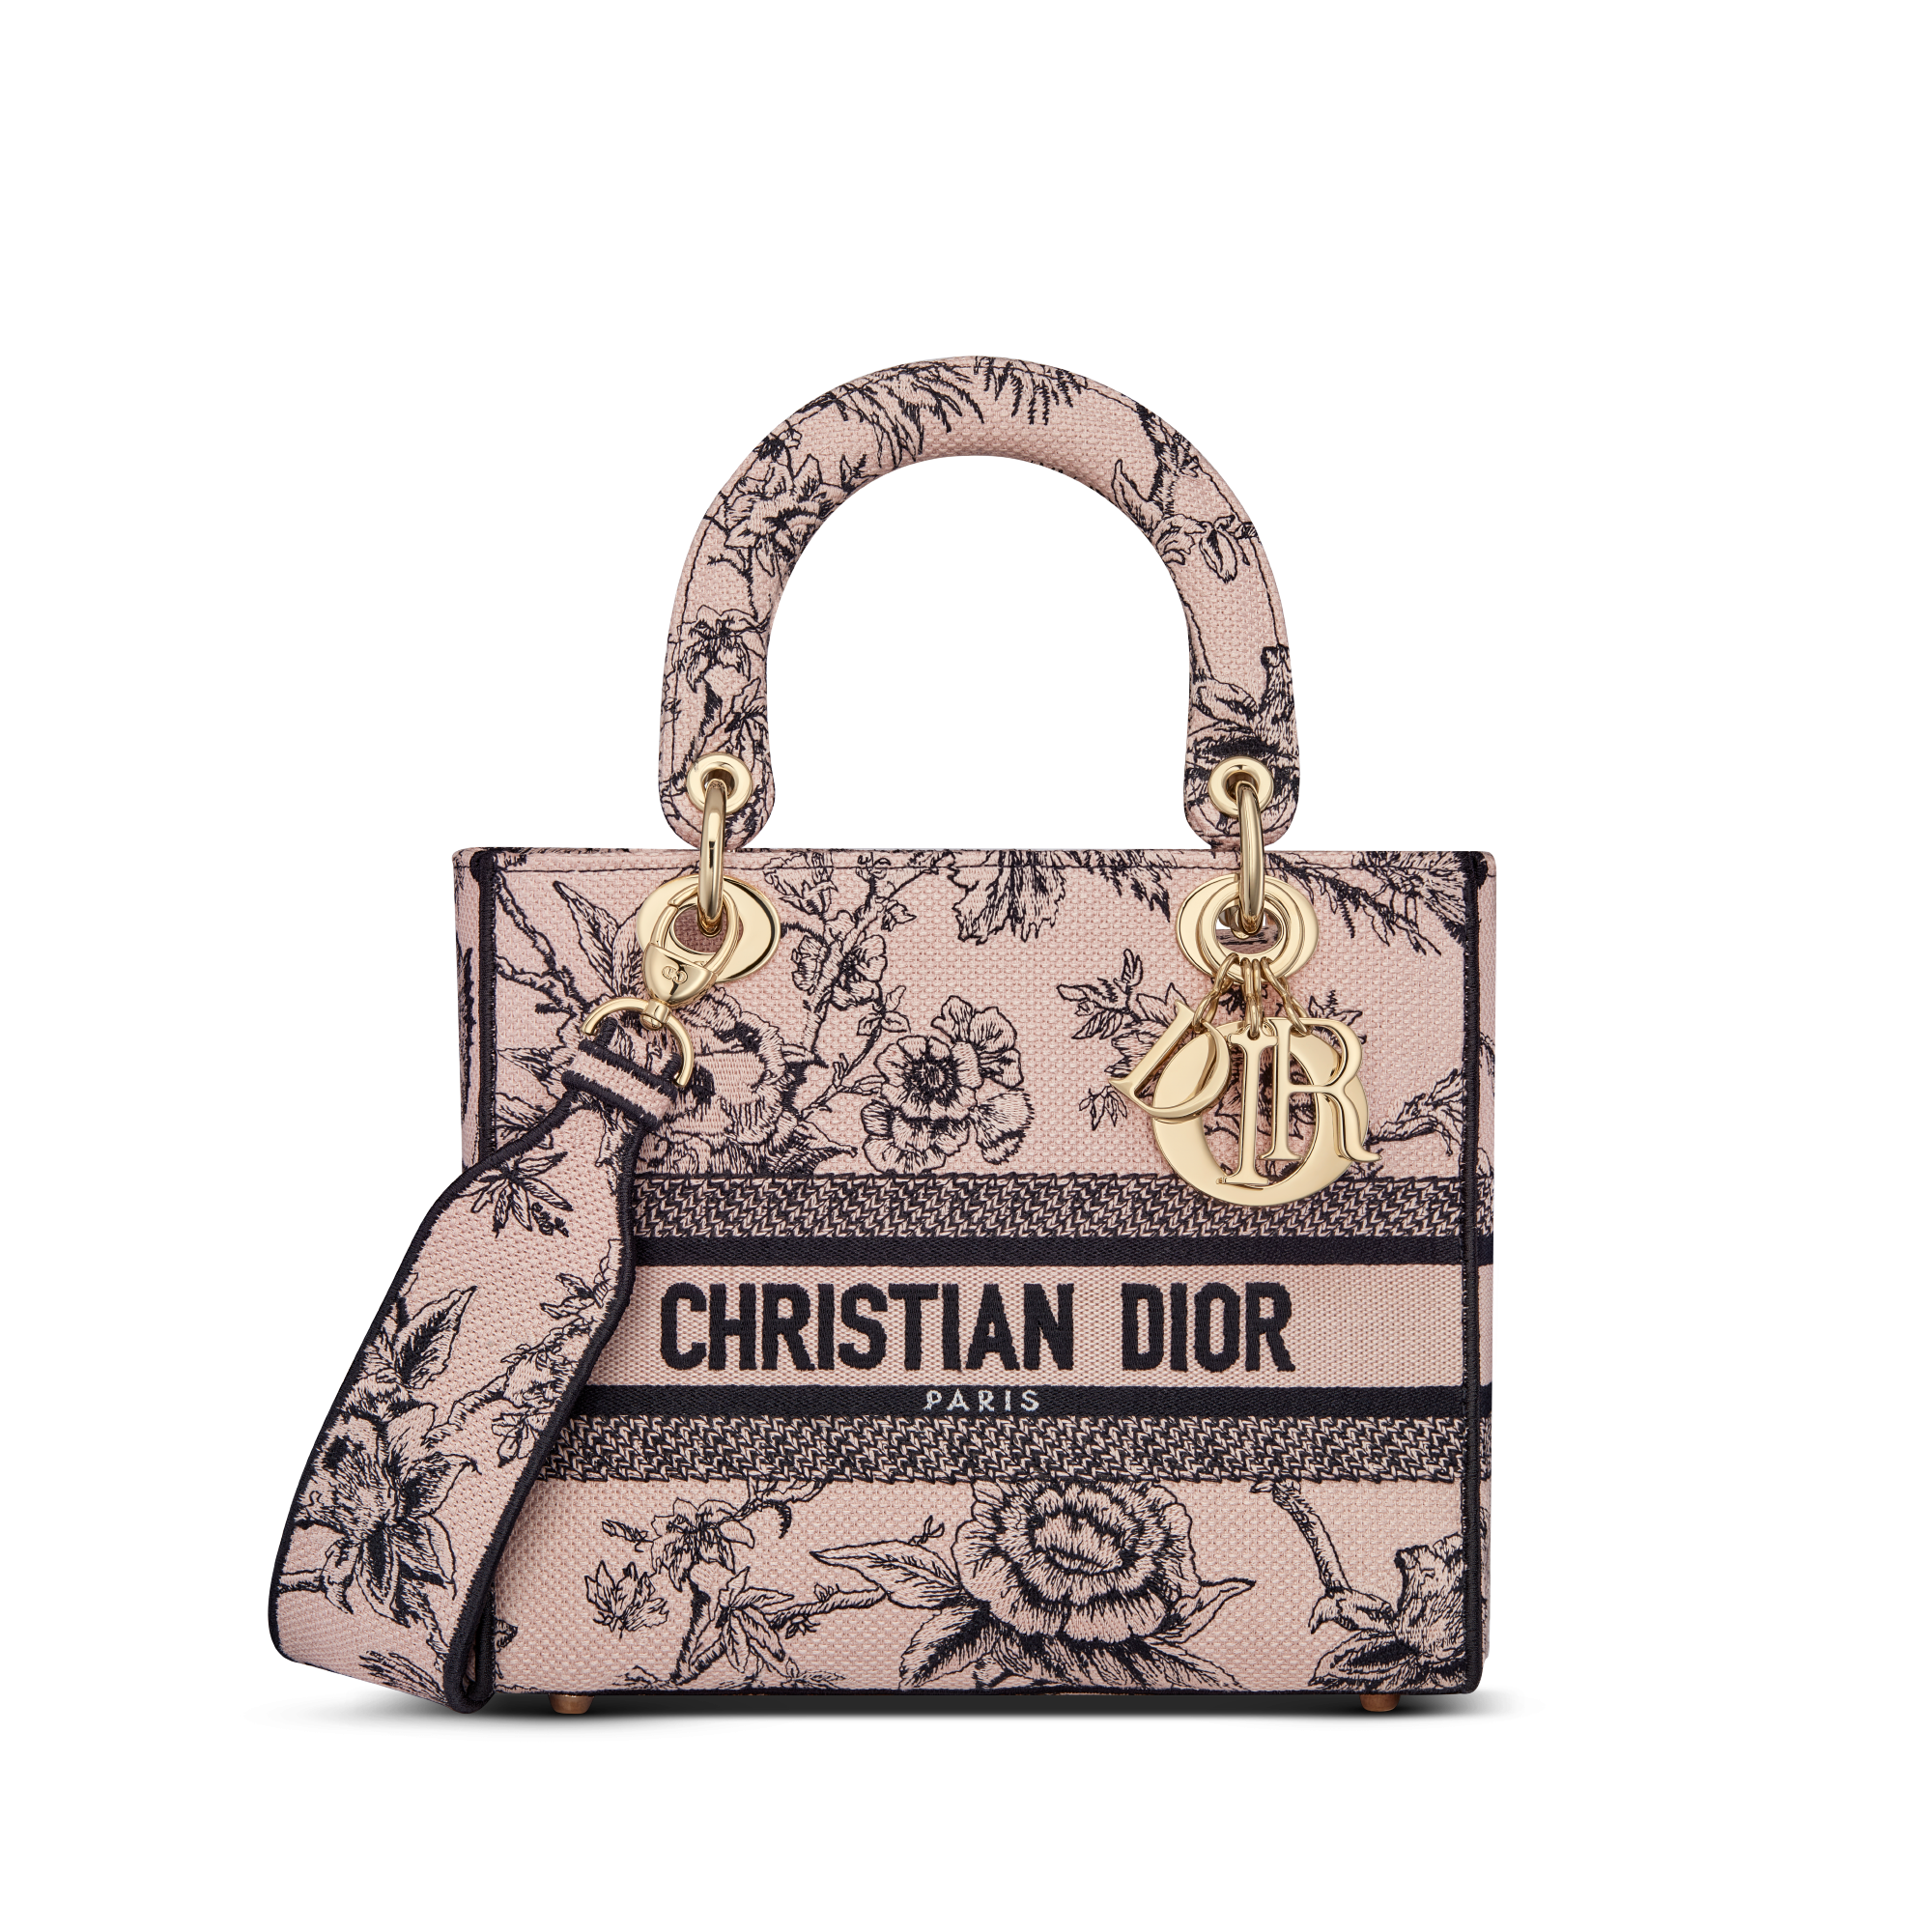 This Is Original Christian Dior Traveling Trolley Bags in East